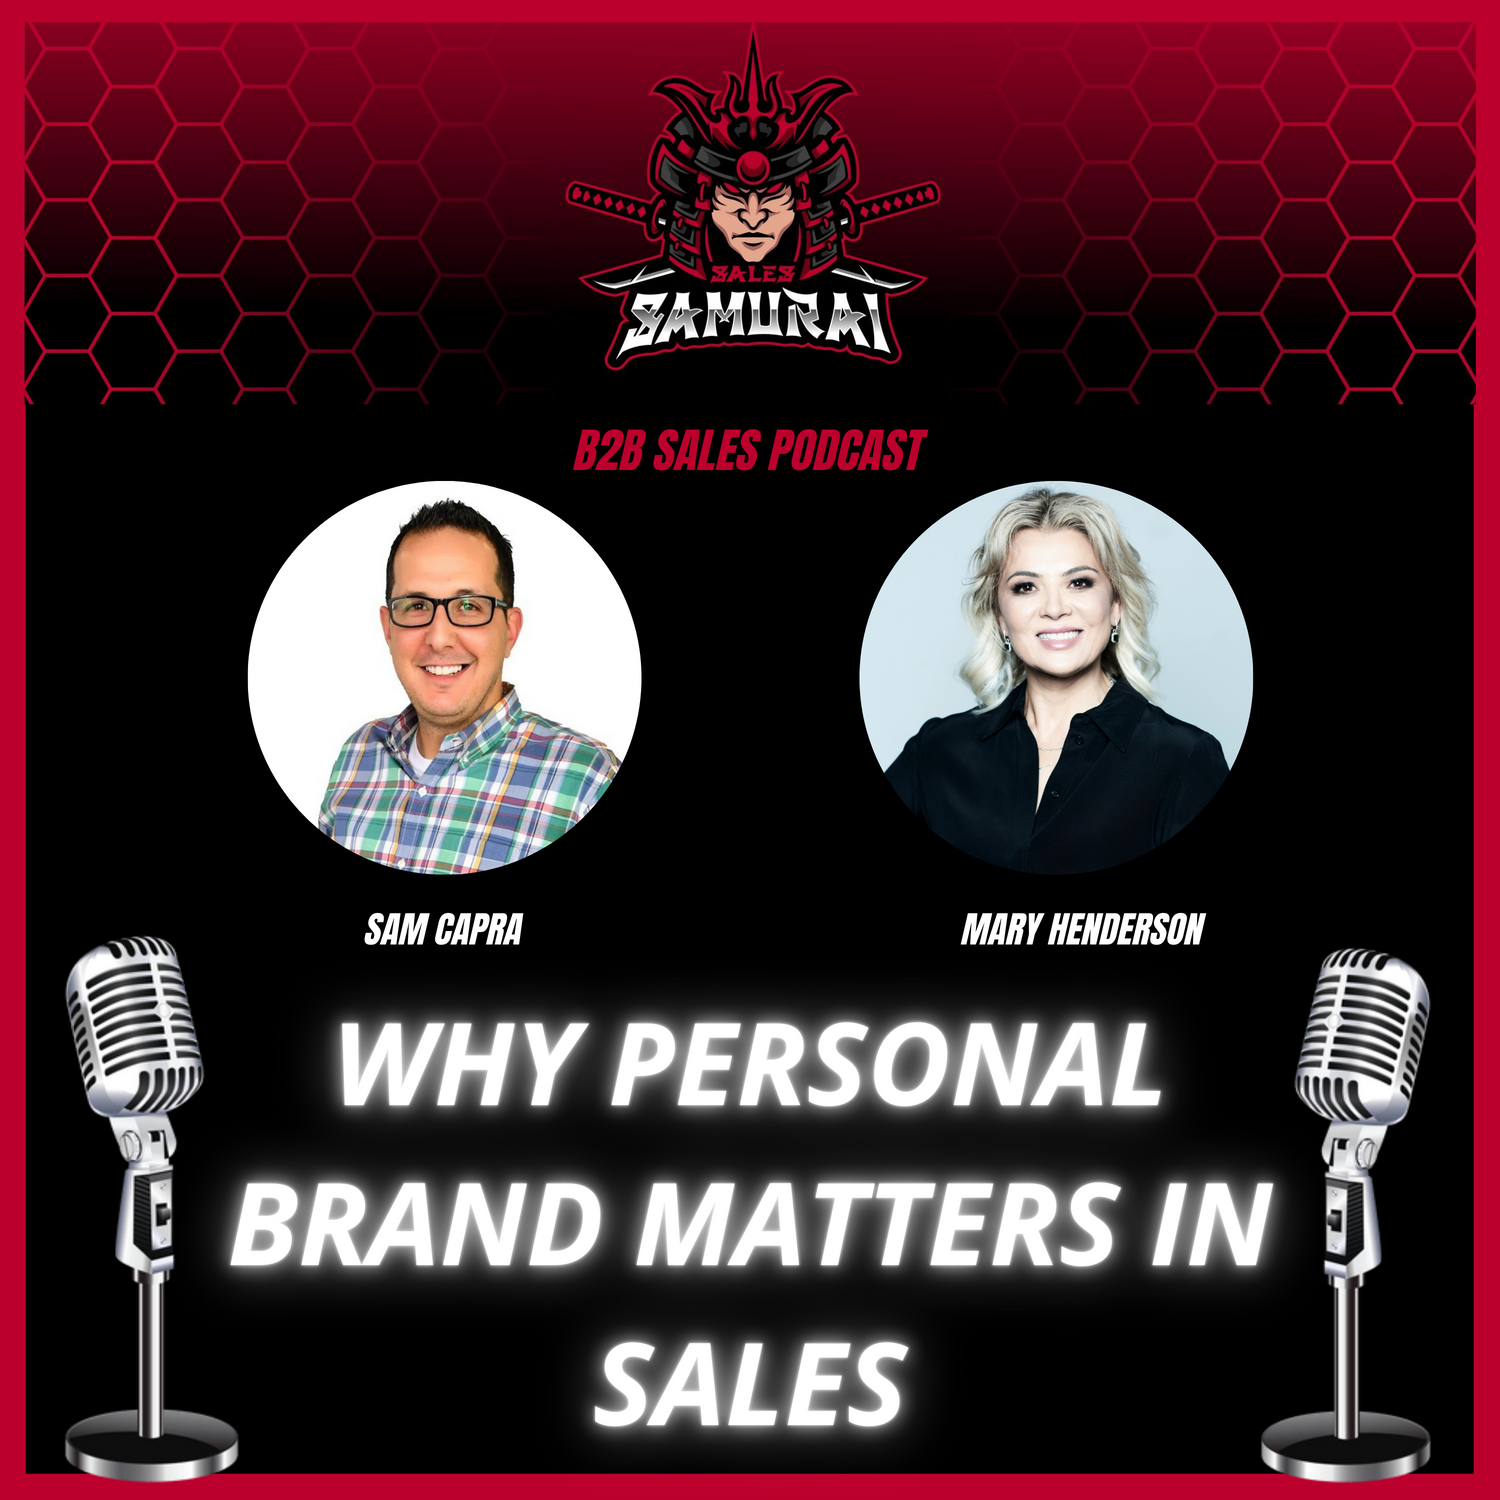 Why Personal Brand Matters in Sales? Image